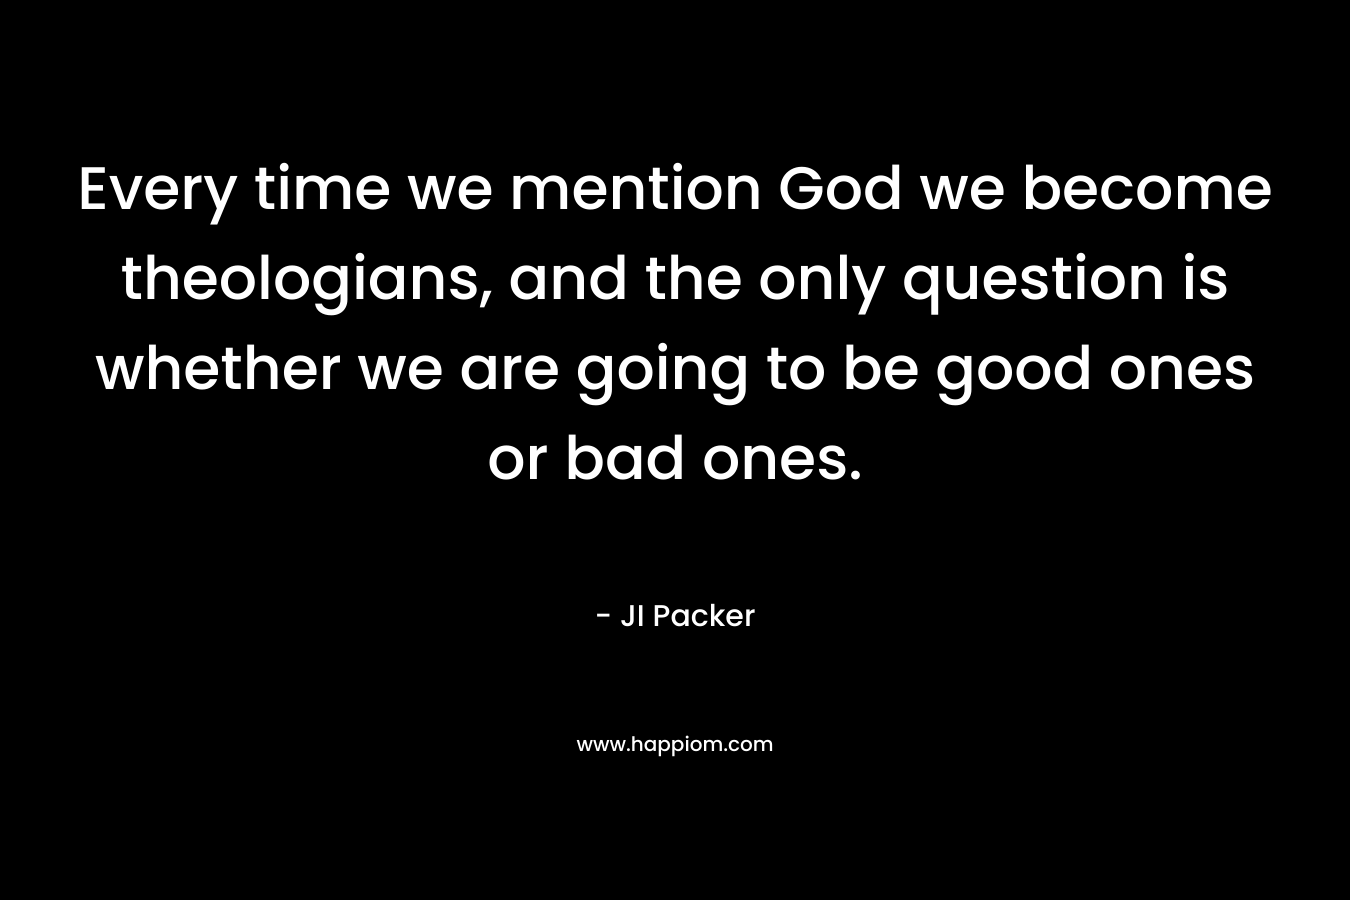 Every time we mention God we become theologians, and the only question is whether we are going to be good ones or bad ones.